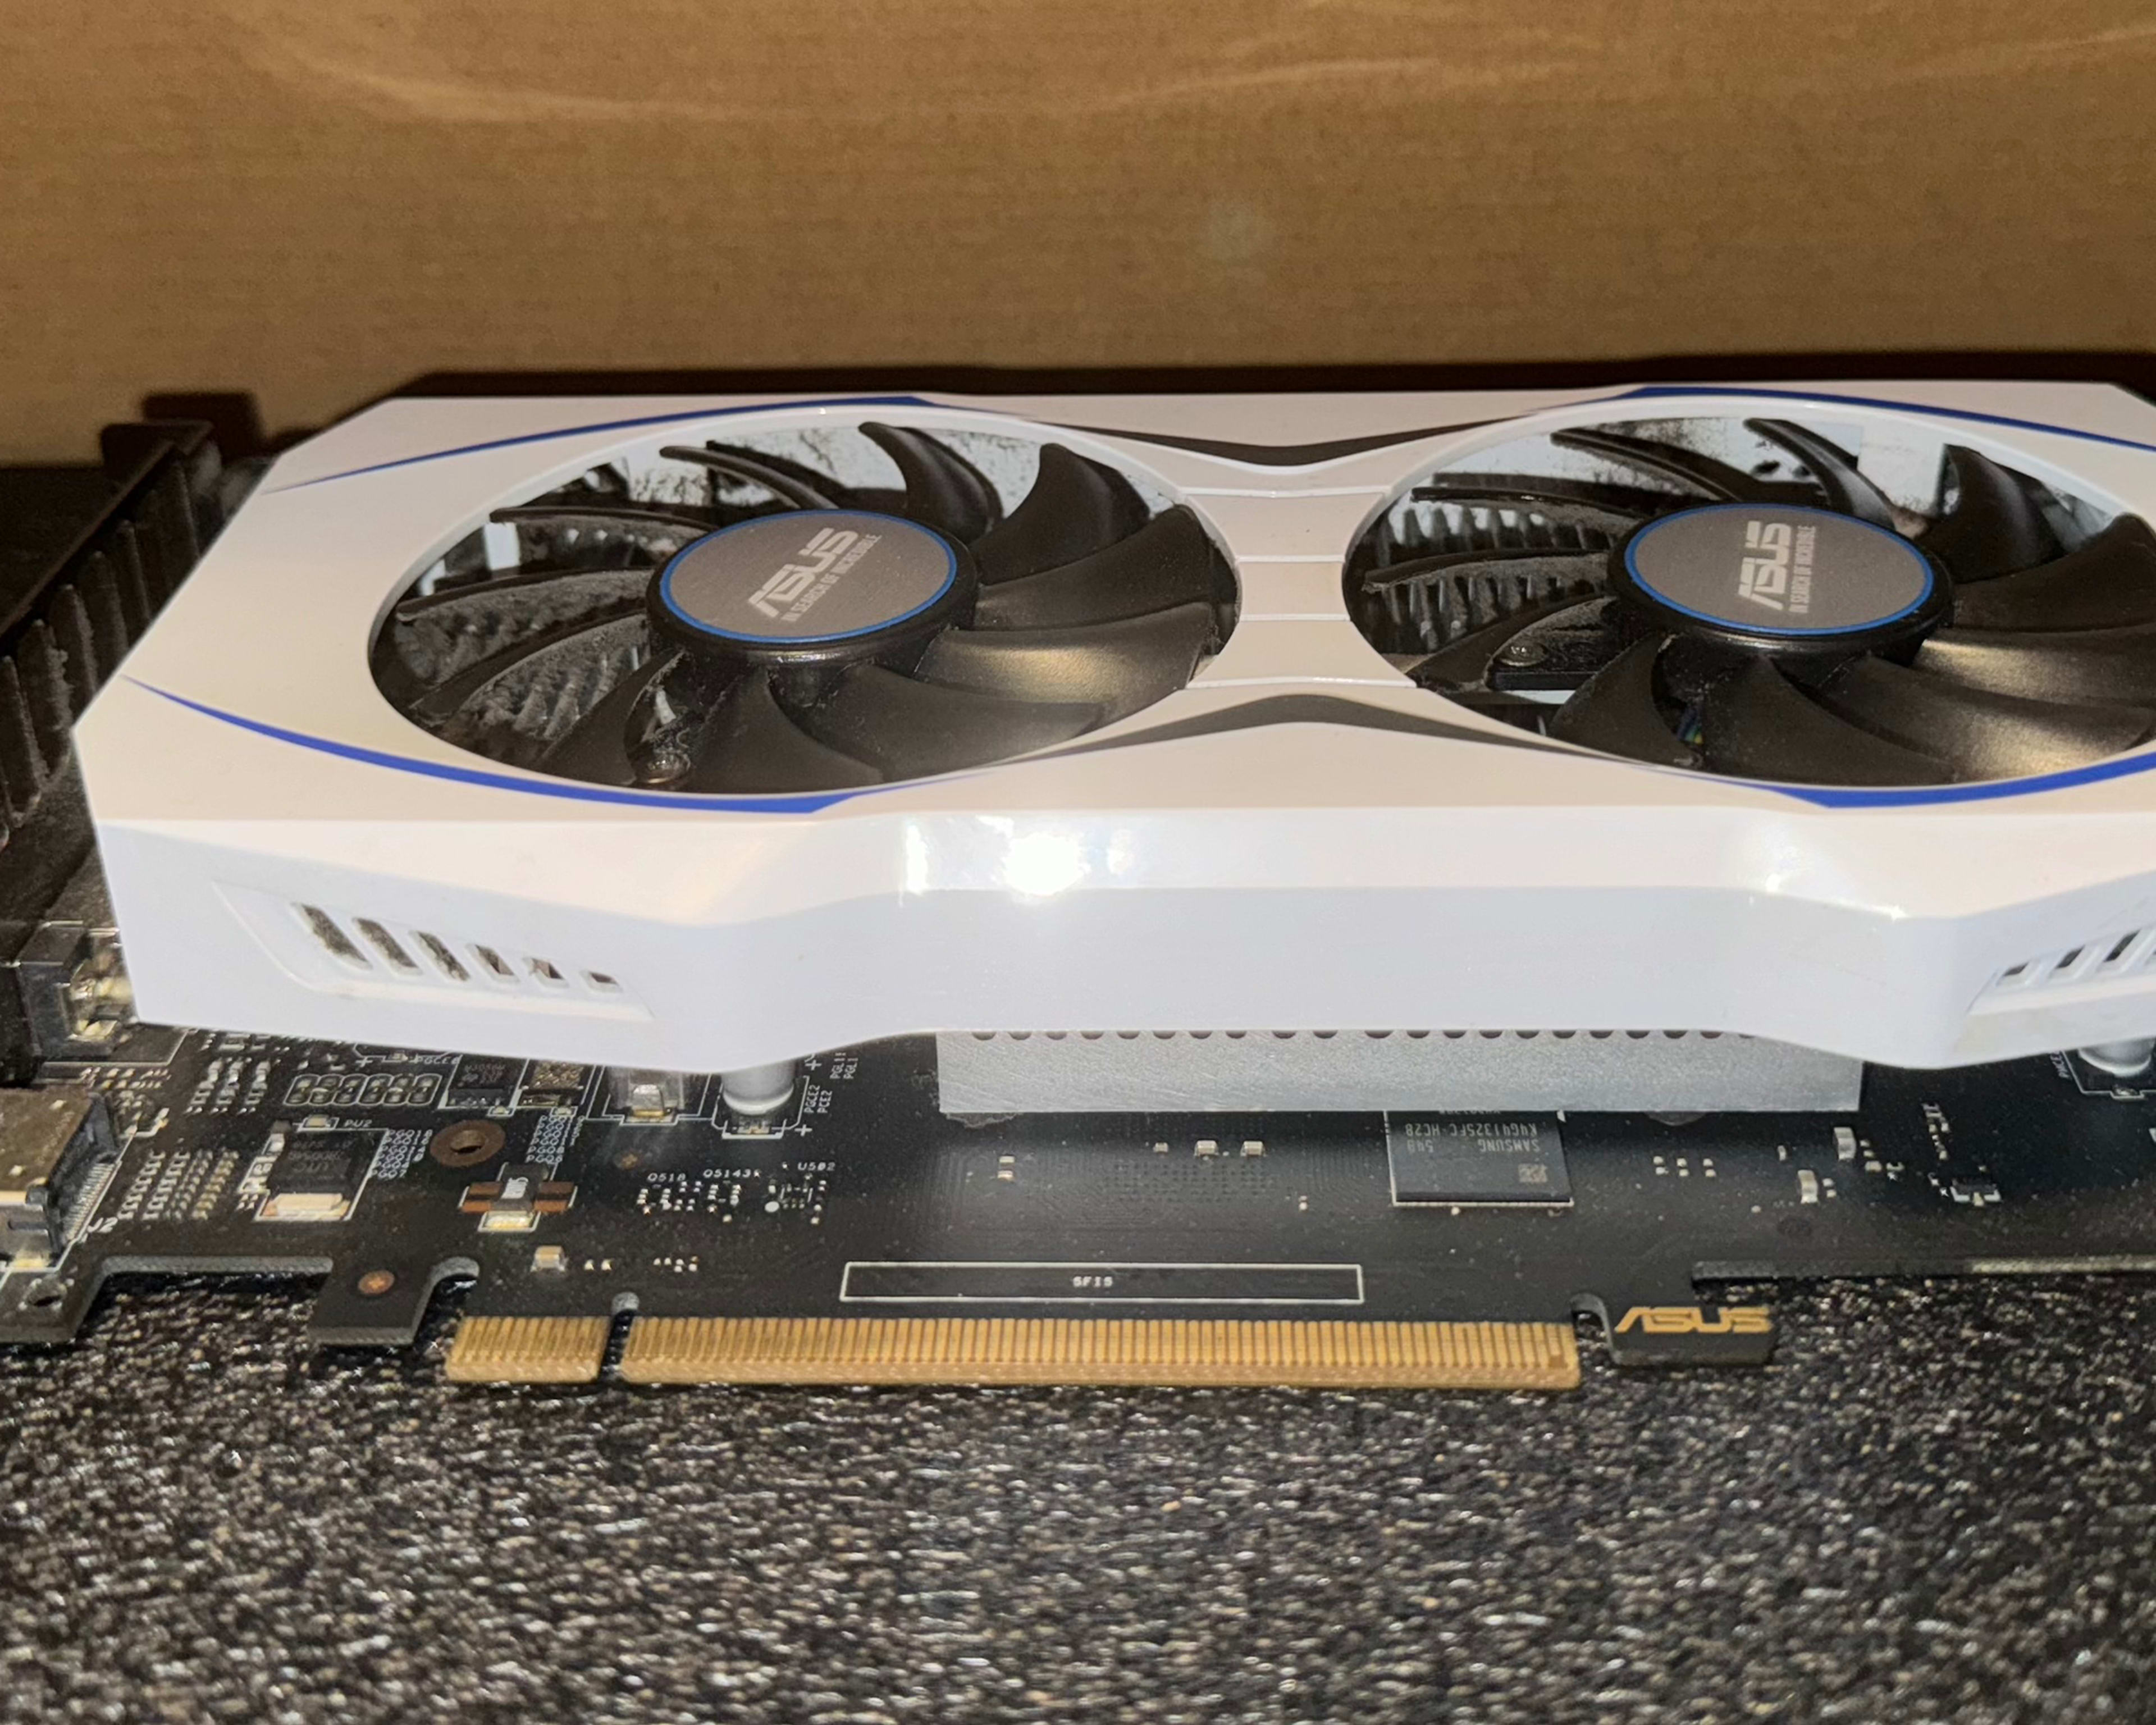 Asus Daul Nvidia GTX 950 limited edition white and blue